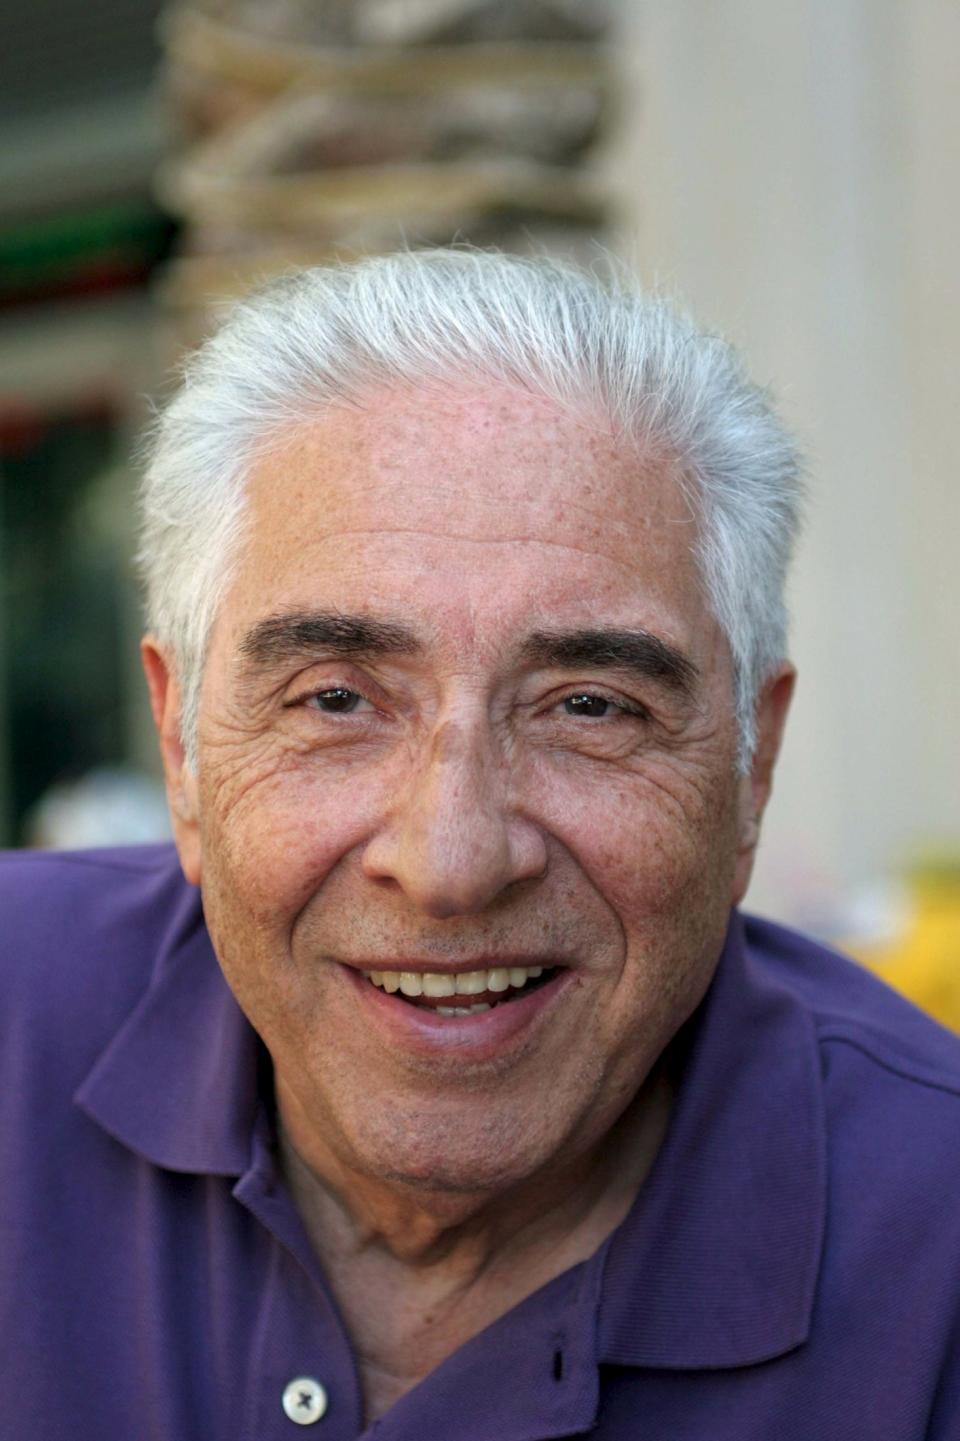 Iranian-American Baquer Namazi is shown in this undated family handout picture released February 27, 2016. Iranian authorities this week arrested the elderly father of an American consultant Siamak Namazi jailed in Iran since October 2015, the man's family said on February 24, 2016. Siamak Namazi, a dual U.S.-Iranian citizen, was detained by Iran's Islamic Revolutionary Guard Corps in October while in Iran visiting family. Officials have yet to announce charges against him. REUTERS/Handout via Reuters ATTENTION EDITORS - THIS PICTURE WAS PROVIDED BY A THIRD PARTY. REUTERS IS UNABLE TO INDEPENDENTLY VERIFY THE AUTHENTICITY, CONTENT, LOCATION OR DATE OF THIS IMAGE. EDITORIAL USE ONLY. NOT FOR SALE FOR MARKETING OR ADVERTISING CAMPAIGNS. NO RESALES. NO ARCHIVE. THIS PICTURE IS DISTRIBUTED EXACTLY AS RECEIVED BY REUTERS, AS A SERVICE TO CLIENTS EDITORIAL USE ONLY. NO RESALES. NO ARCHIVE